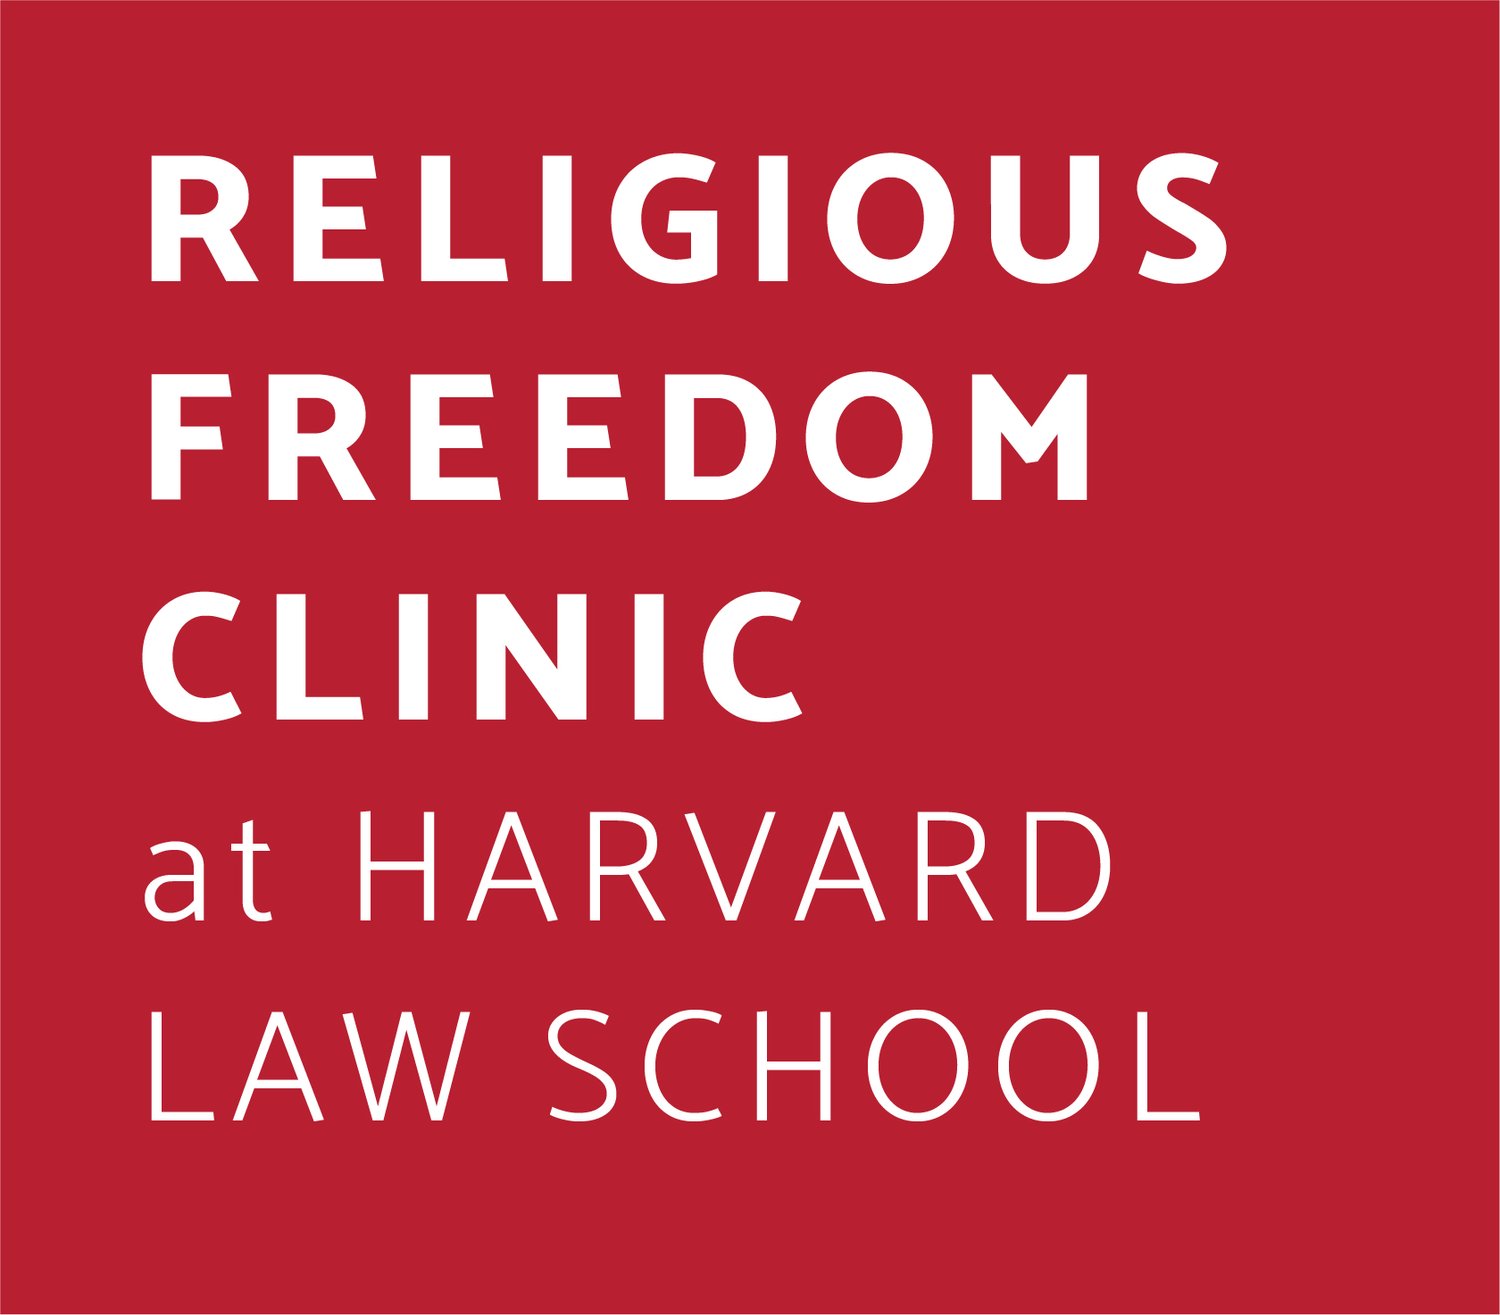 The Religious Freedom Clinic at Harvard Law School